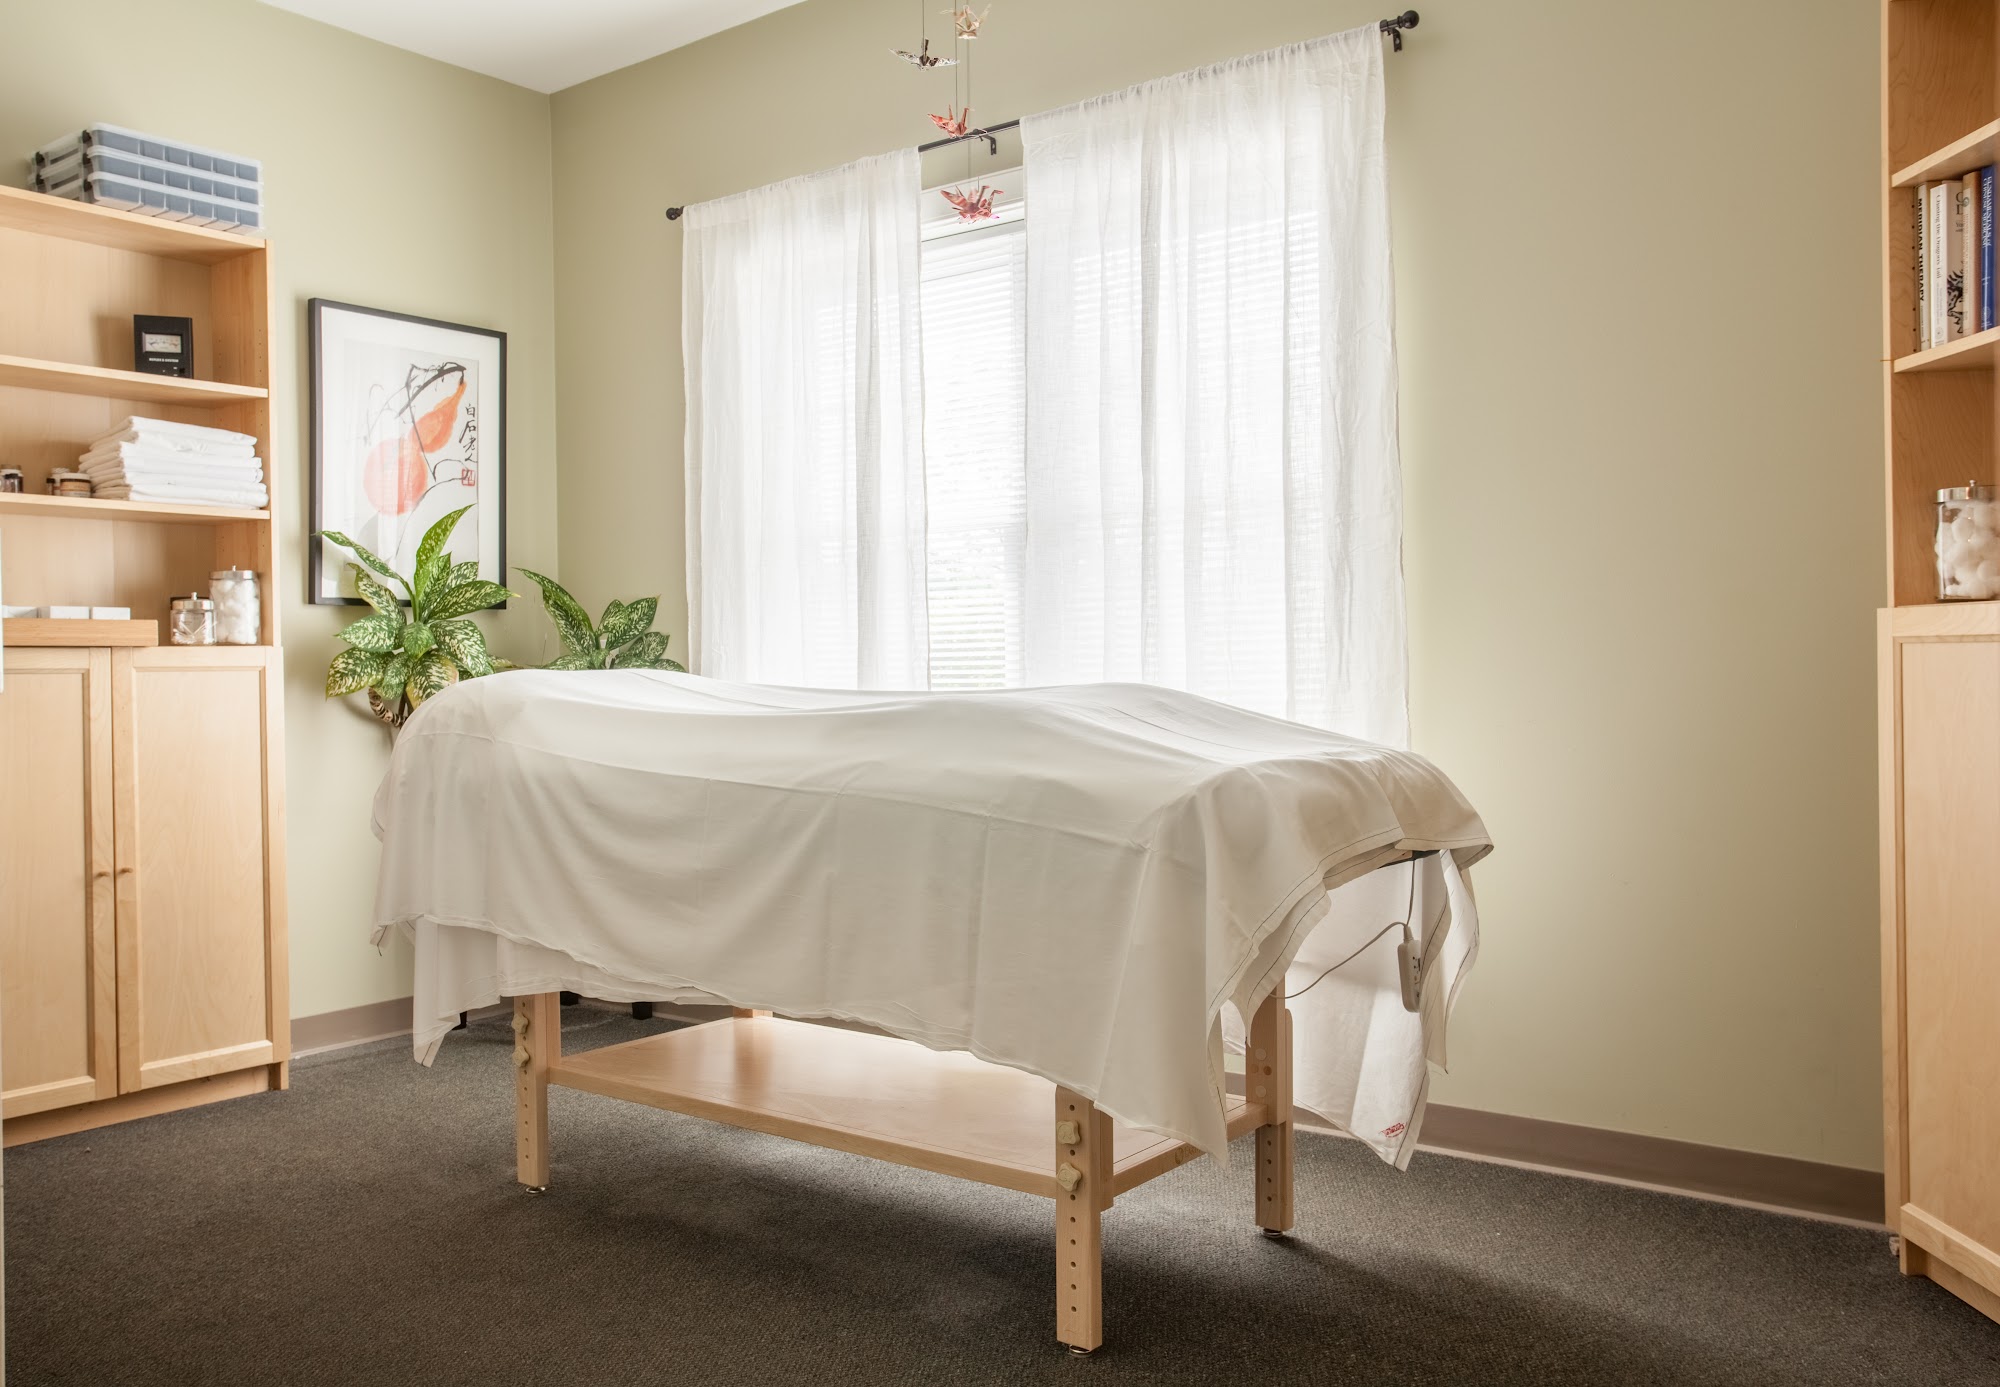 Whole Health Acupuncture and Herbal Medicine 60 Forest Falls Dr, Yarmouth Maine 04096